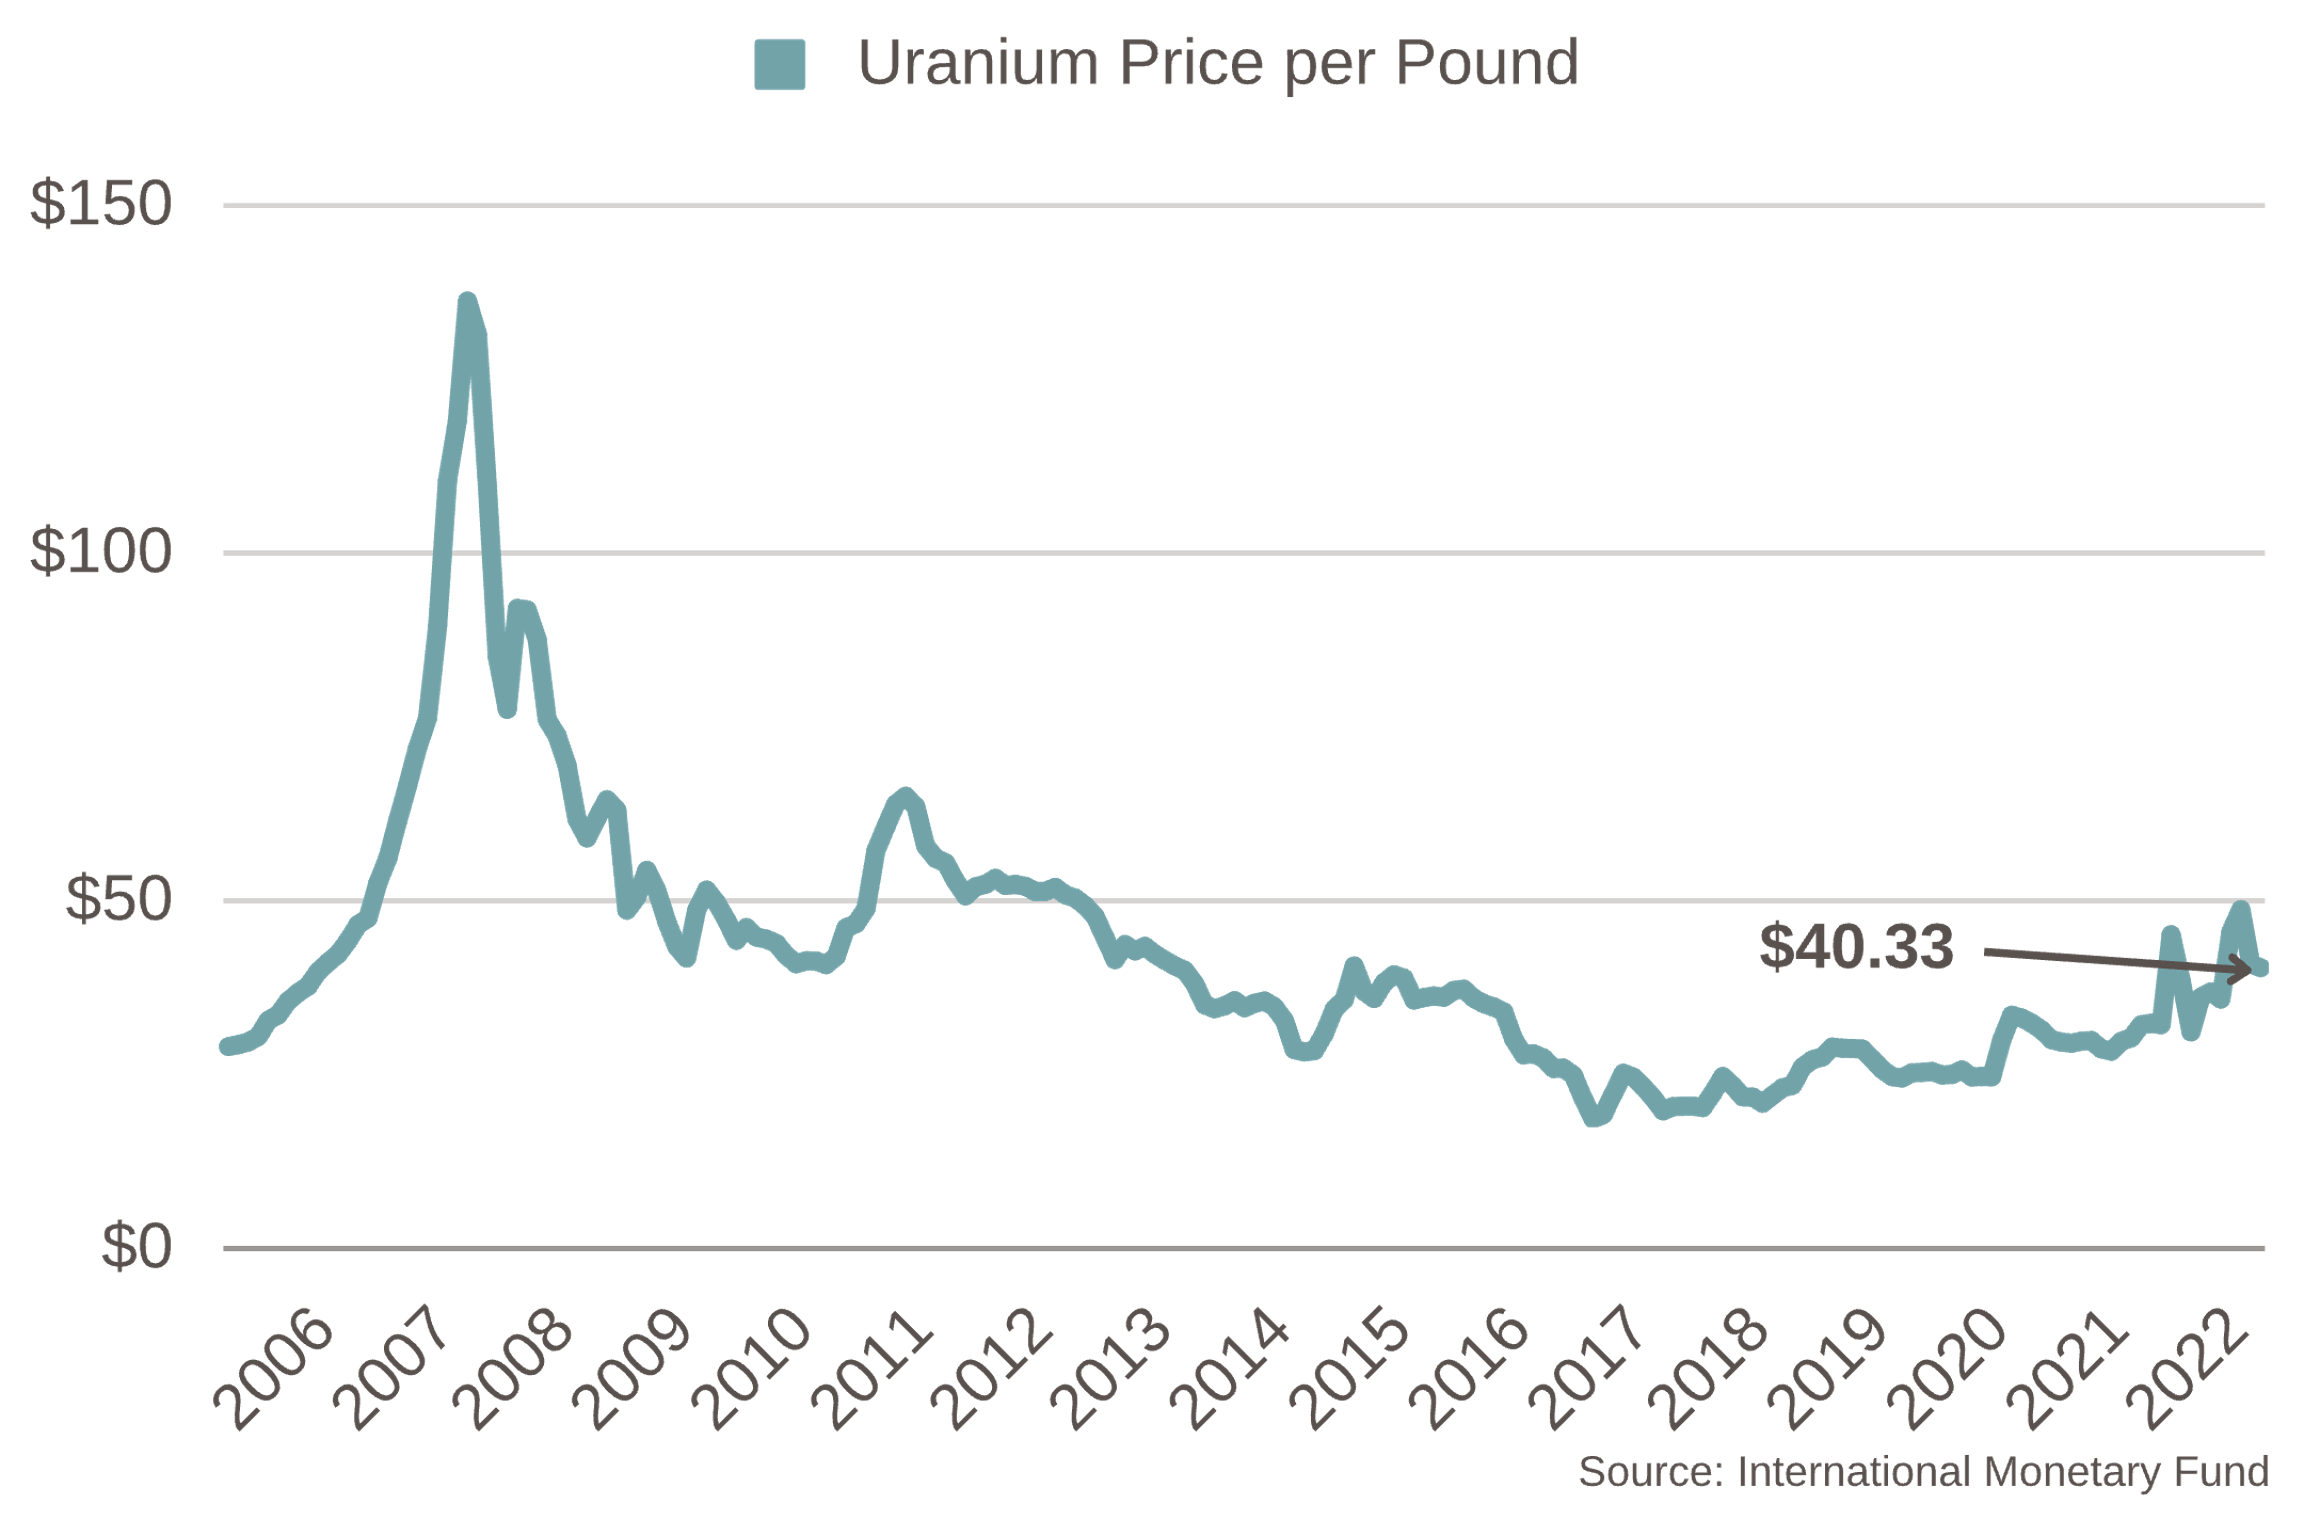 Chart showing the price per pound of uranium from 2005 to 2022. There's a large spike up above $130 in 2007, but it's fallen to $40.33 today.